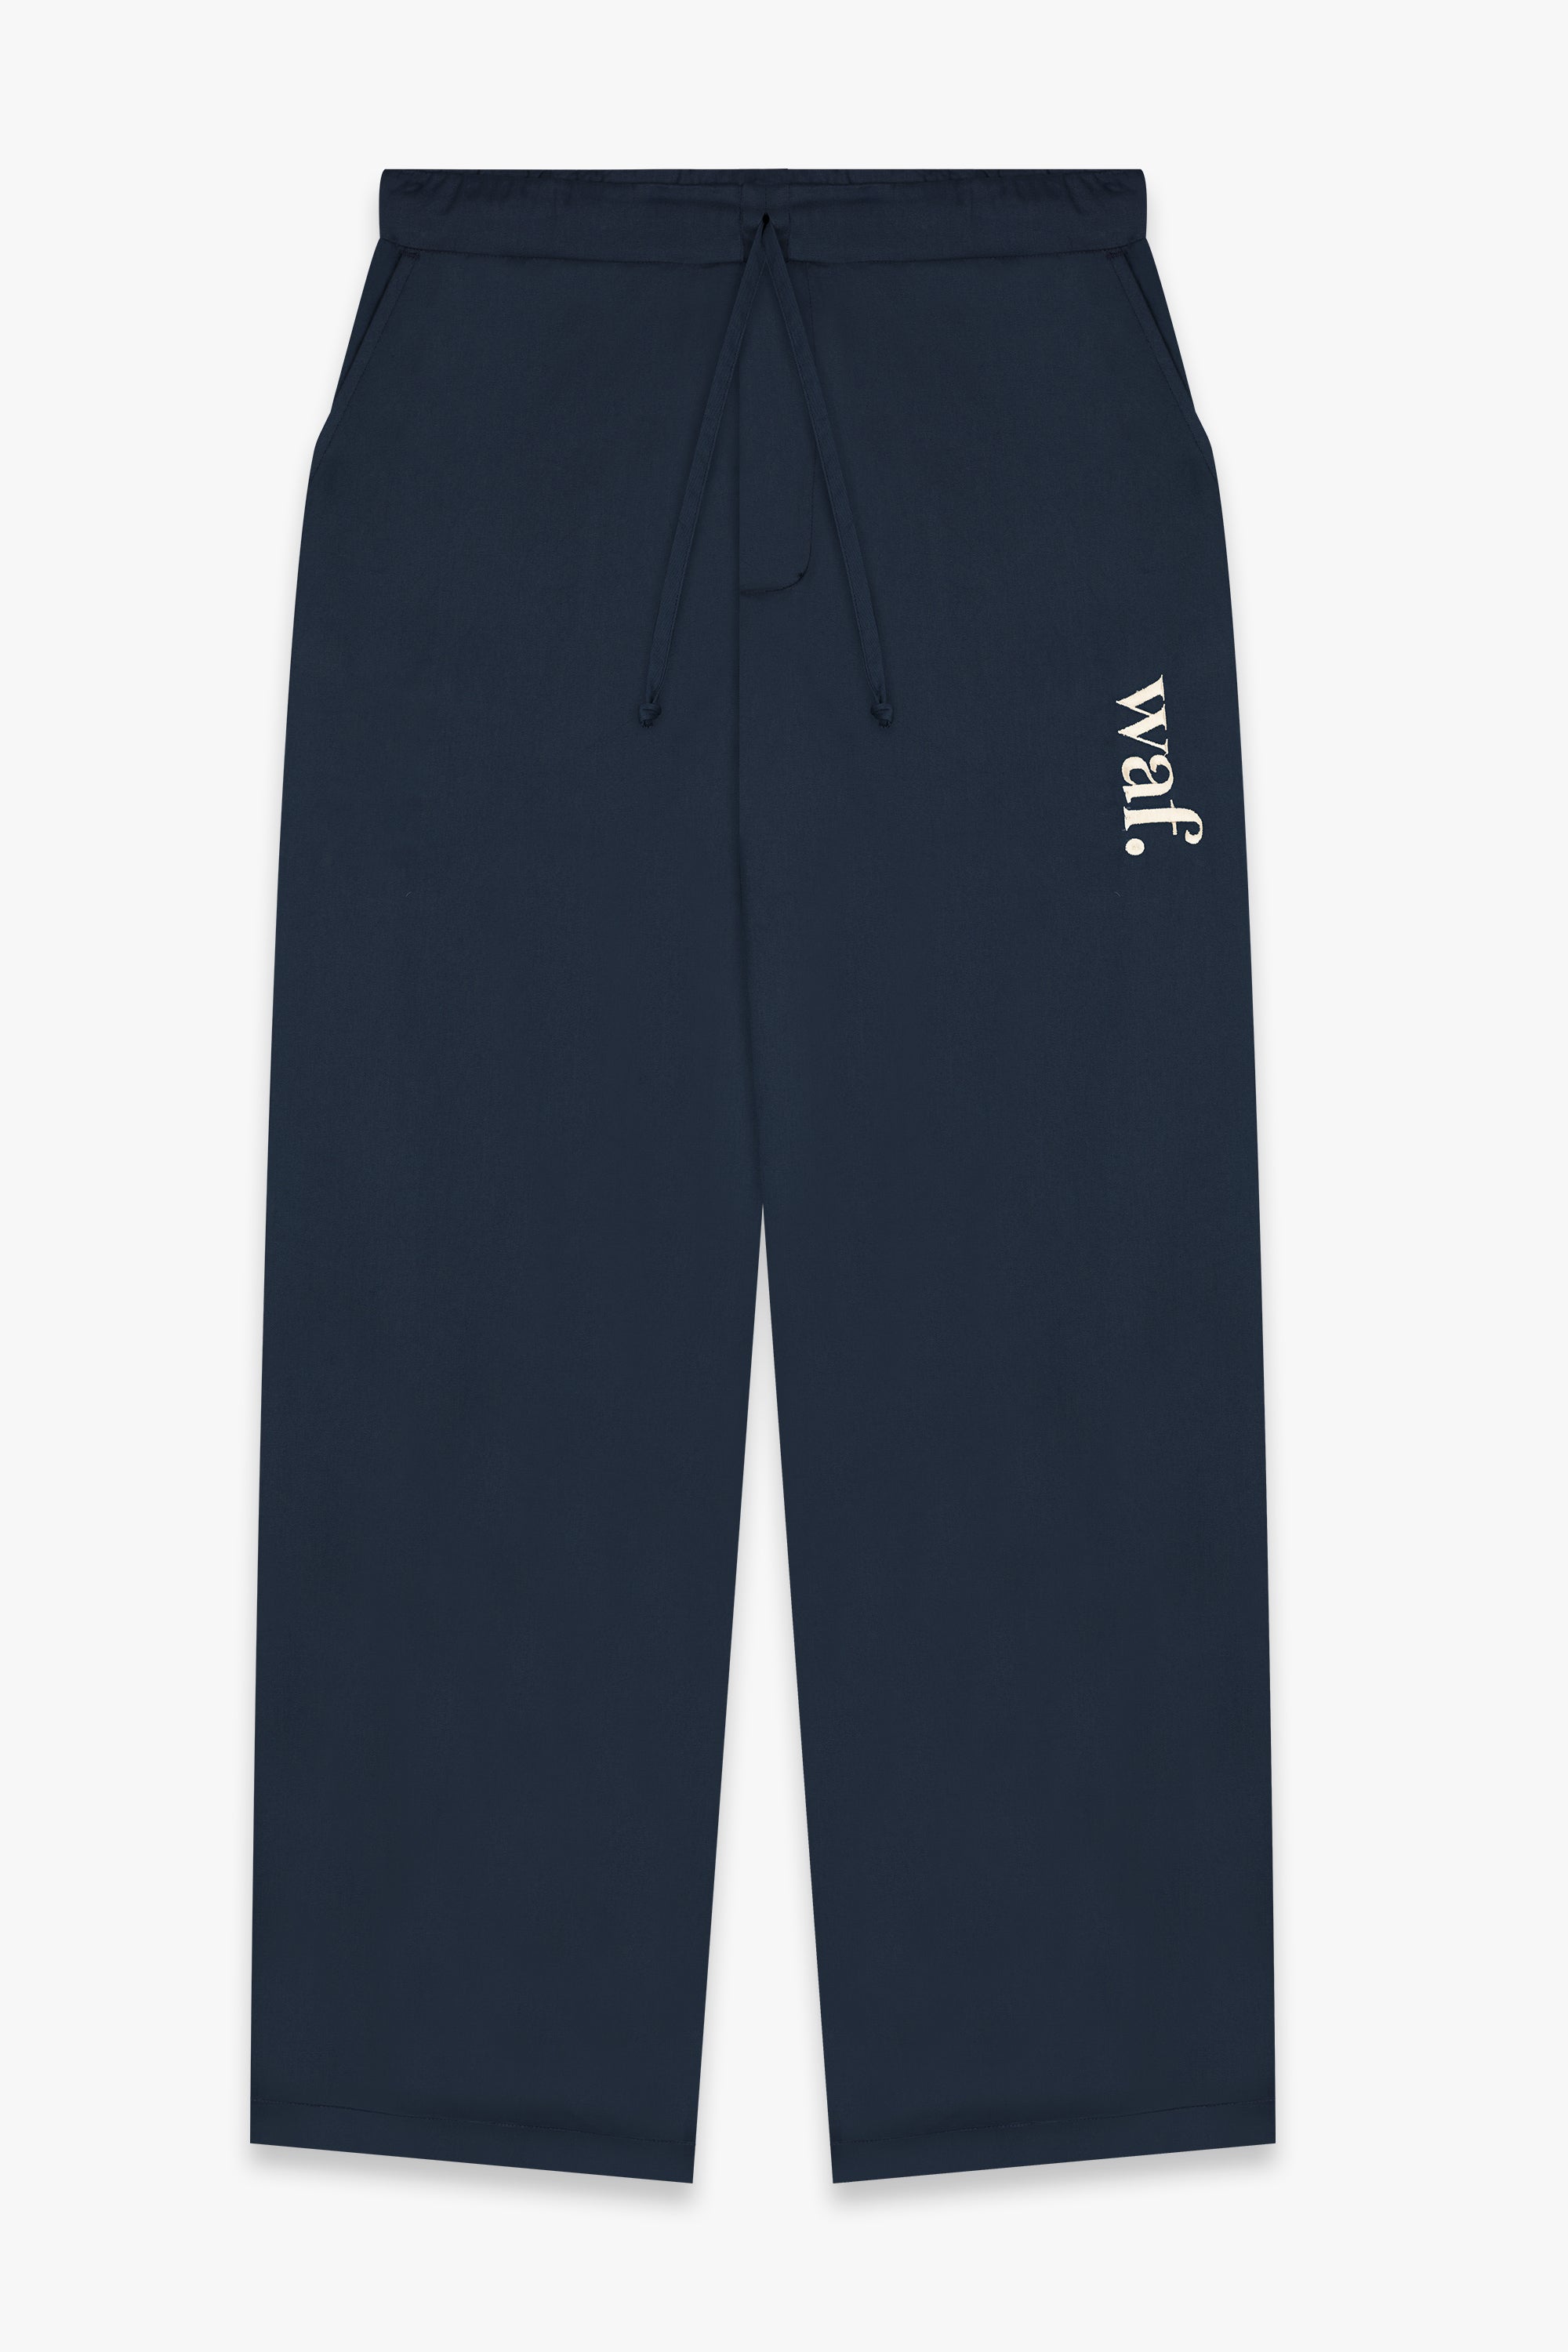 Baggy Chinos pants navy blue